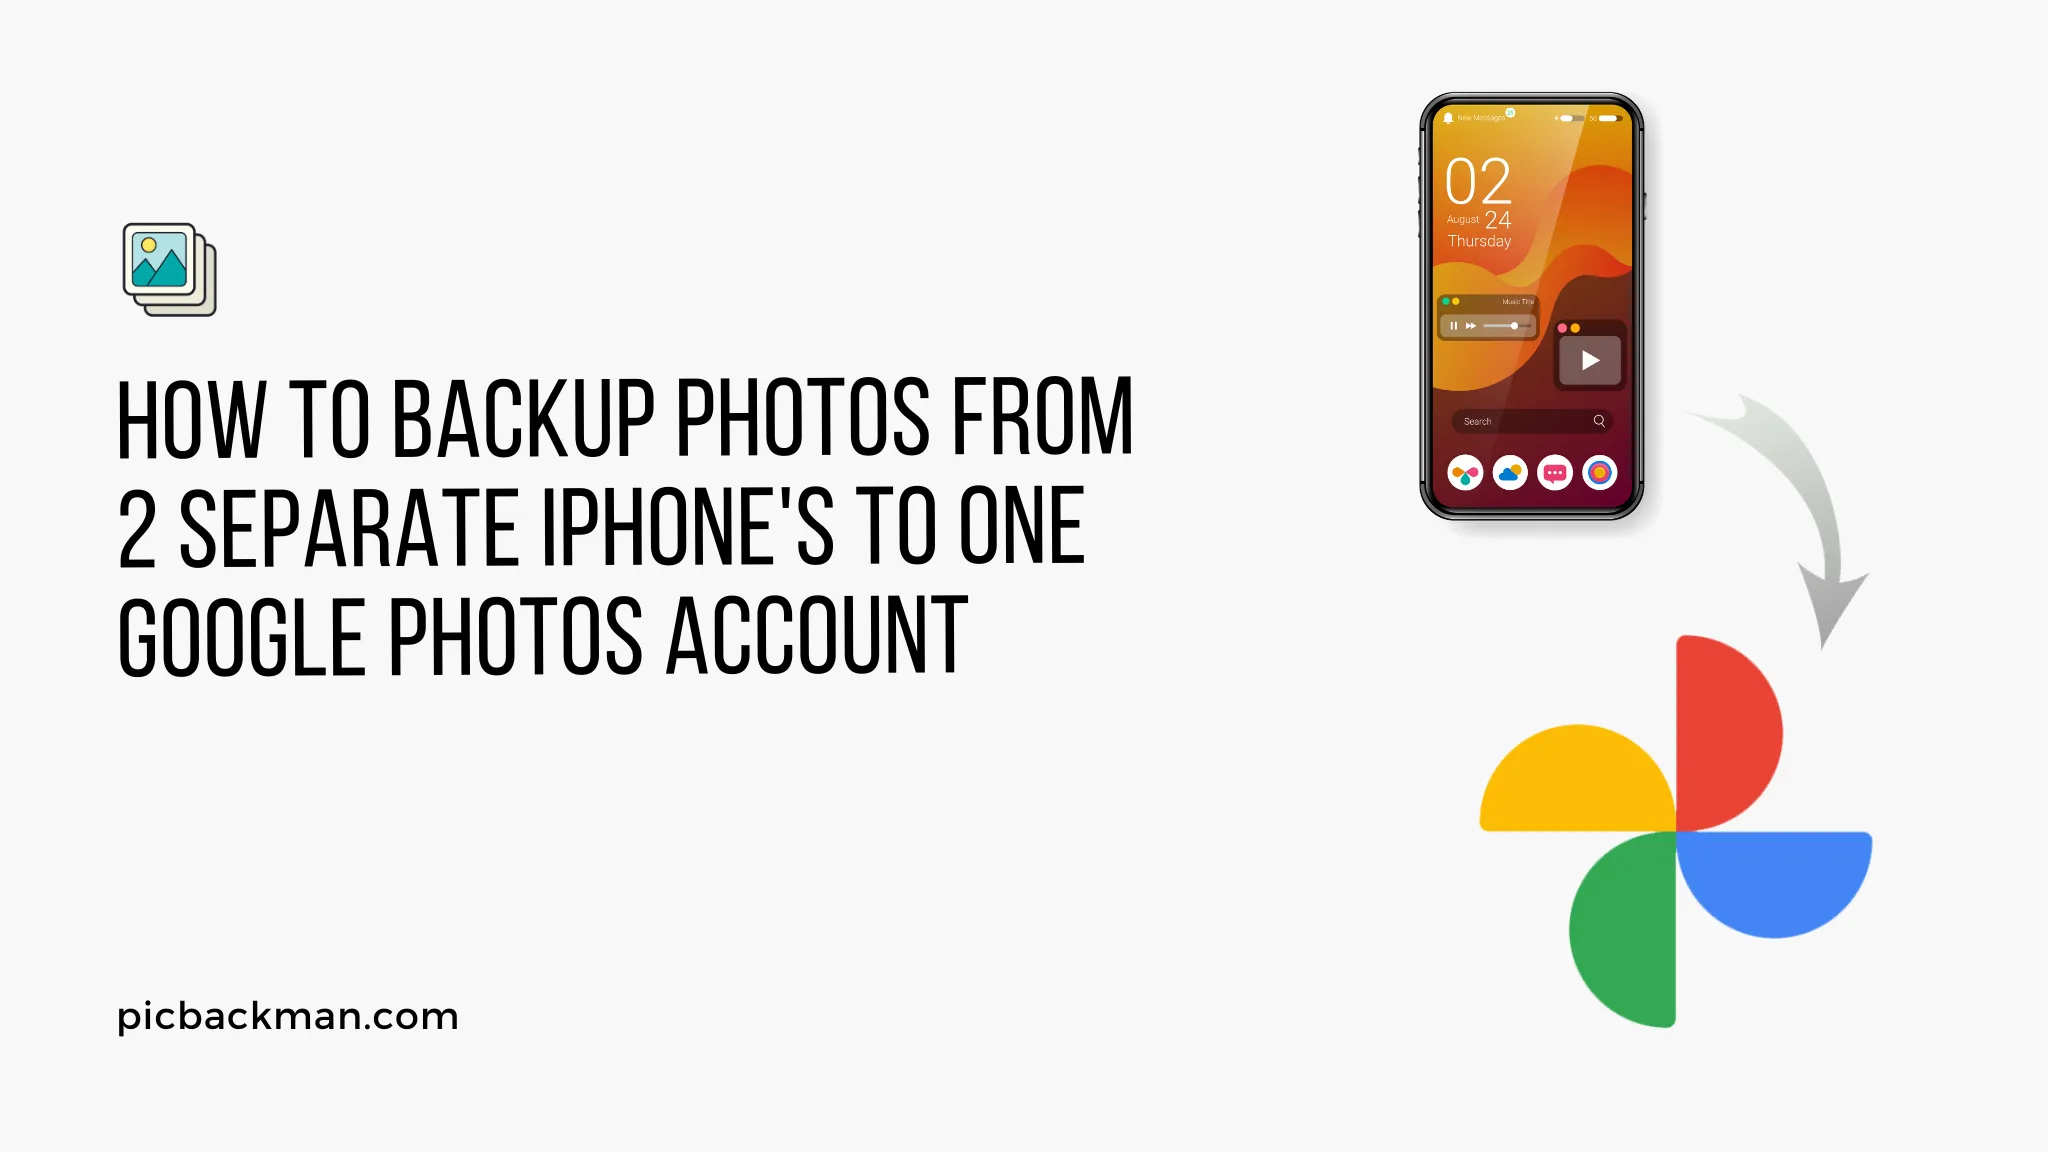 How to Backup photos from 2 separate iPhone's to one Google Photos Account?